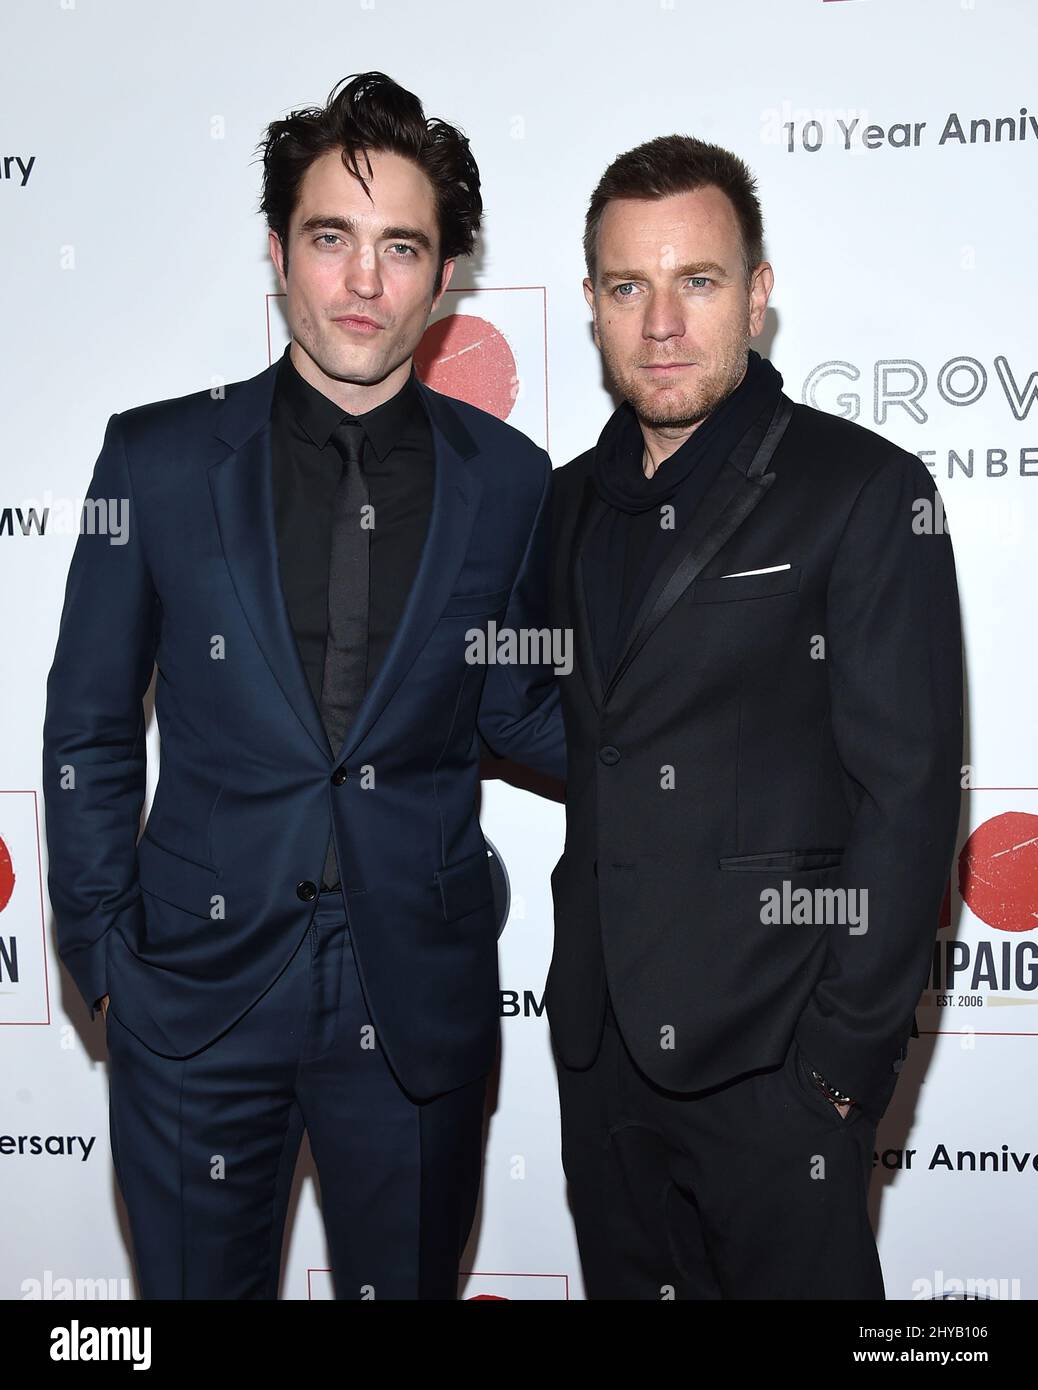 Robert Pattinson and Ewan McGregor attends the 10th Annual GO Campaign Gala held at Manuela at Hauser Wirth & Schimmel. GO Campaign champions local heroes around the world who are improving the lives of orphans and vulnerable children. Stock Photo